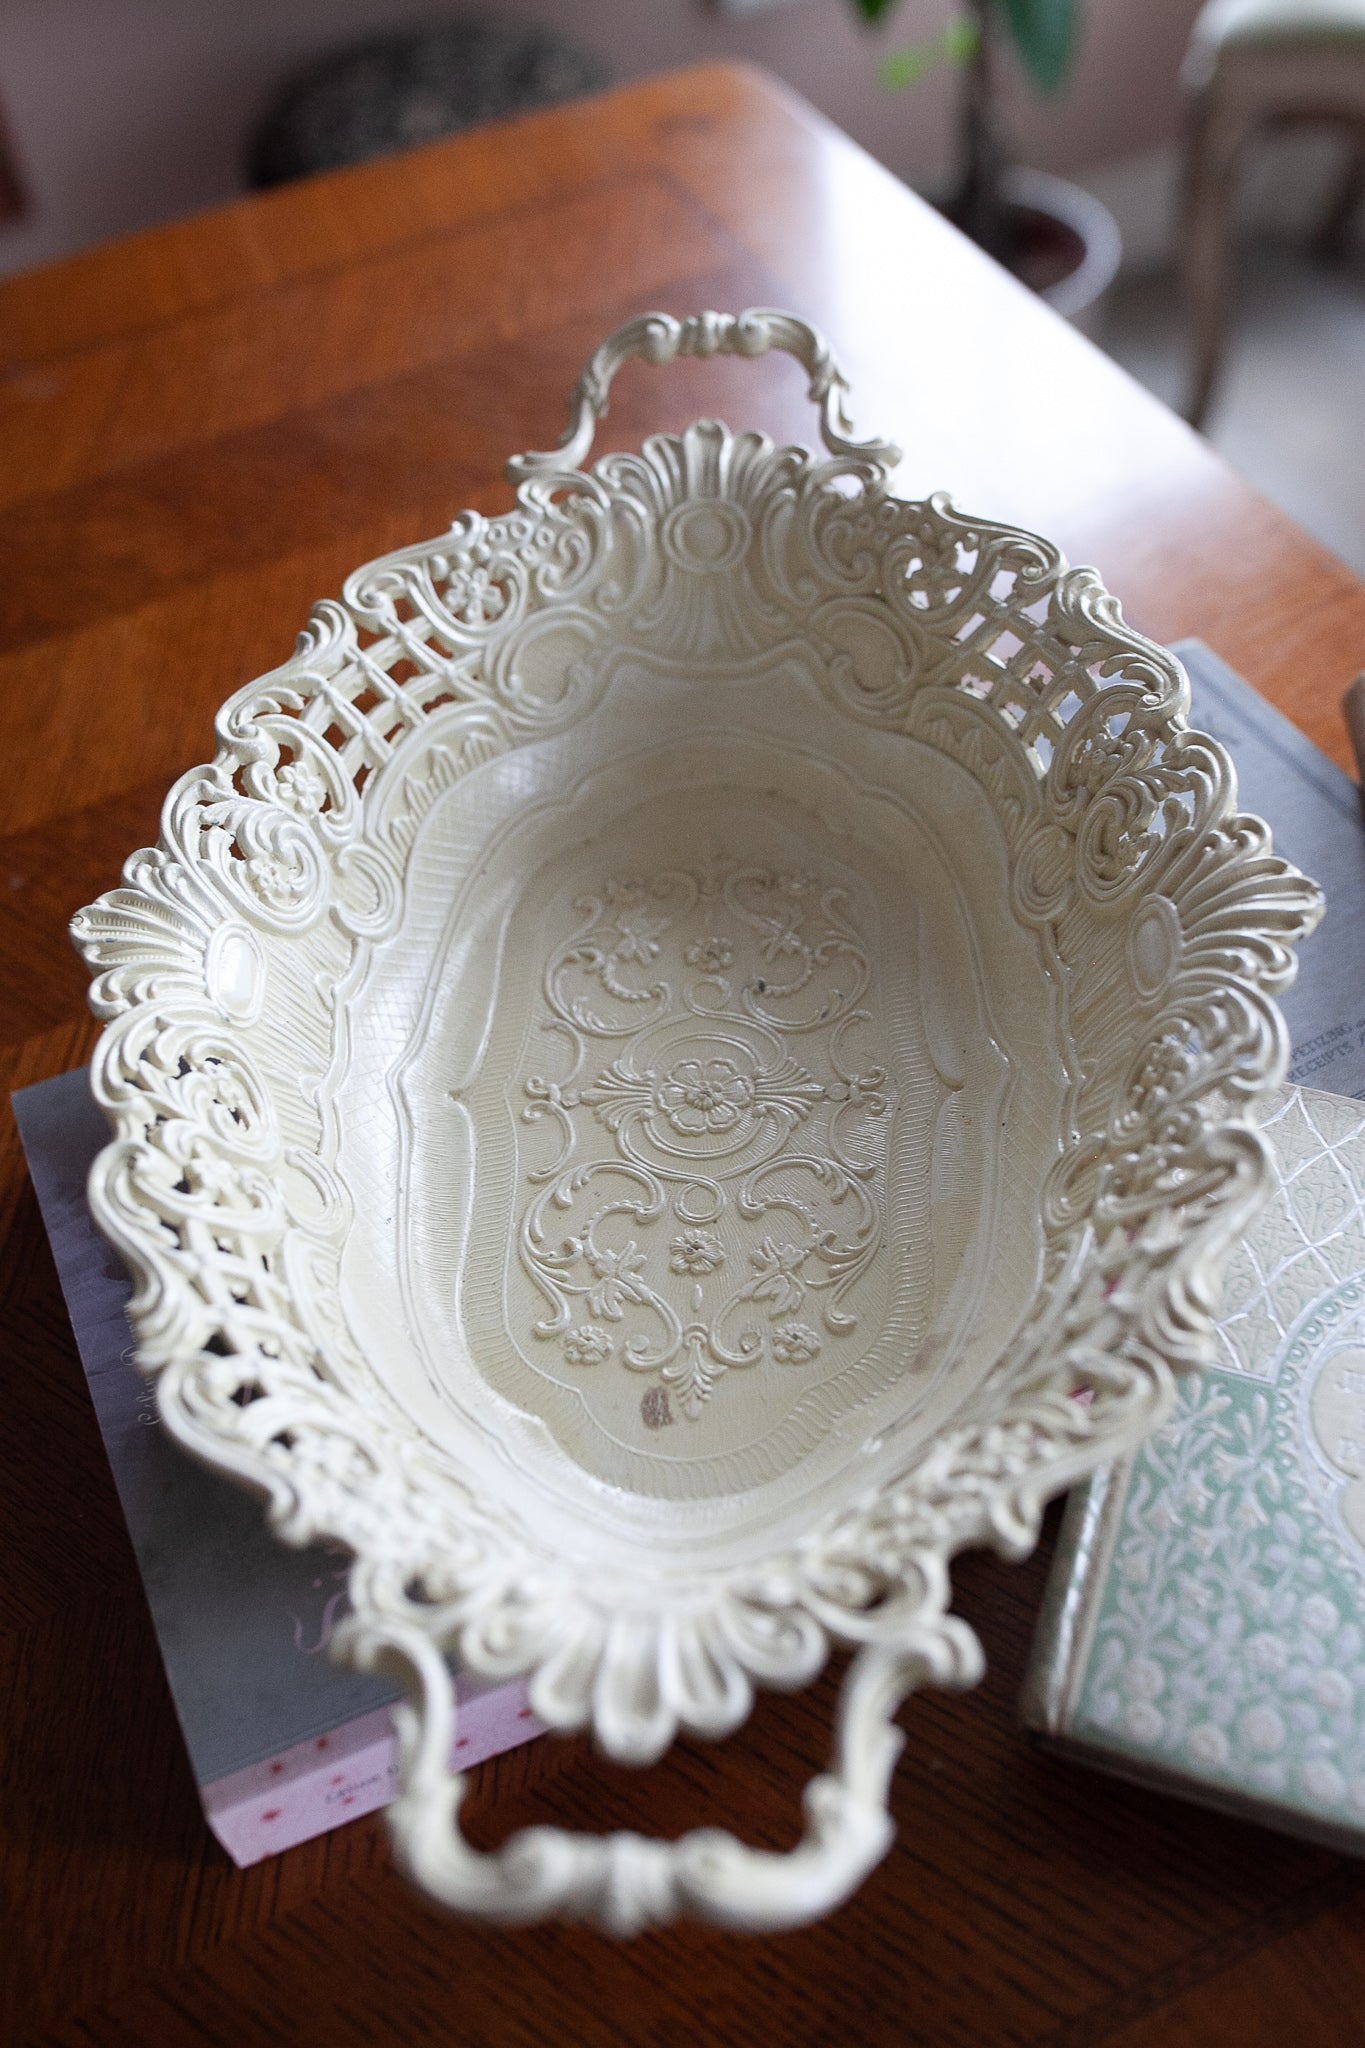 Vintage Bowl - Off White Reticulated Cast Iron Floral Bowl -Handled Bowl Made in Italy